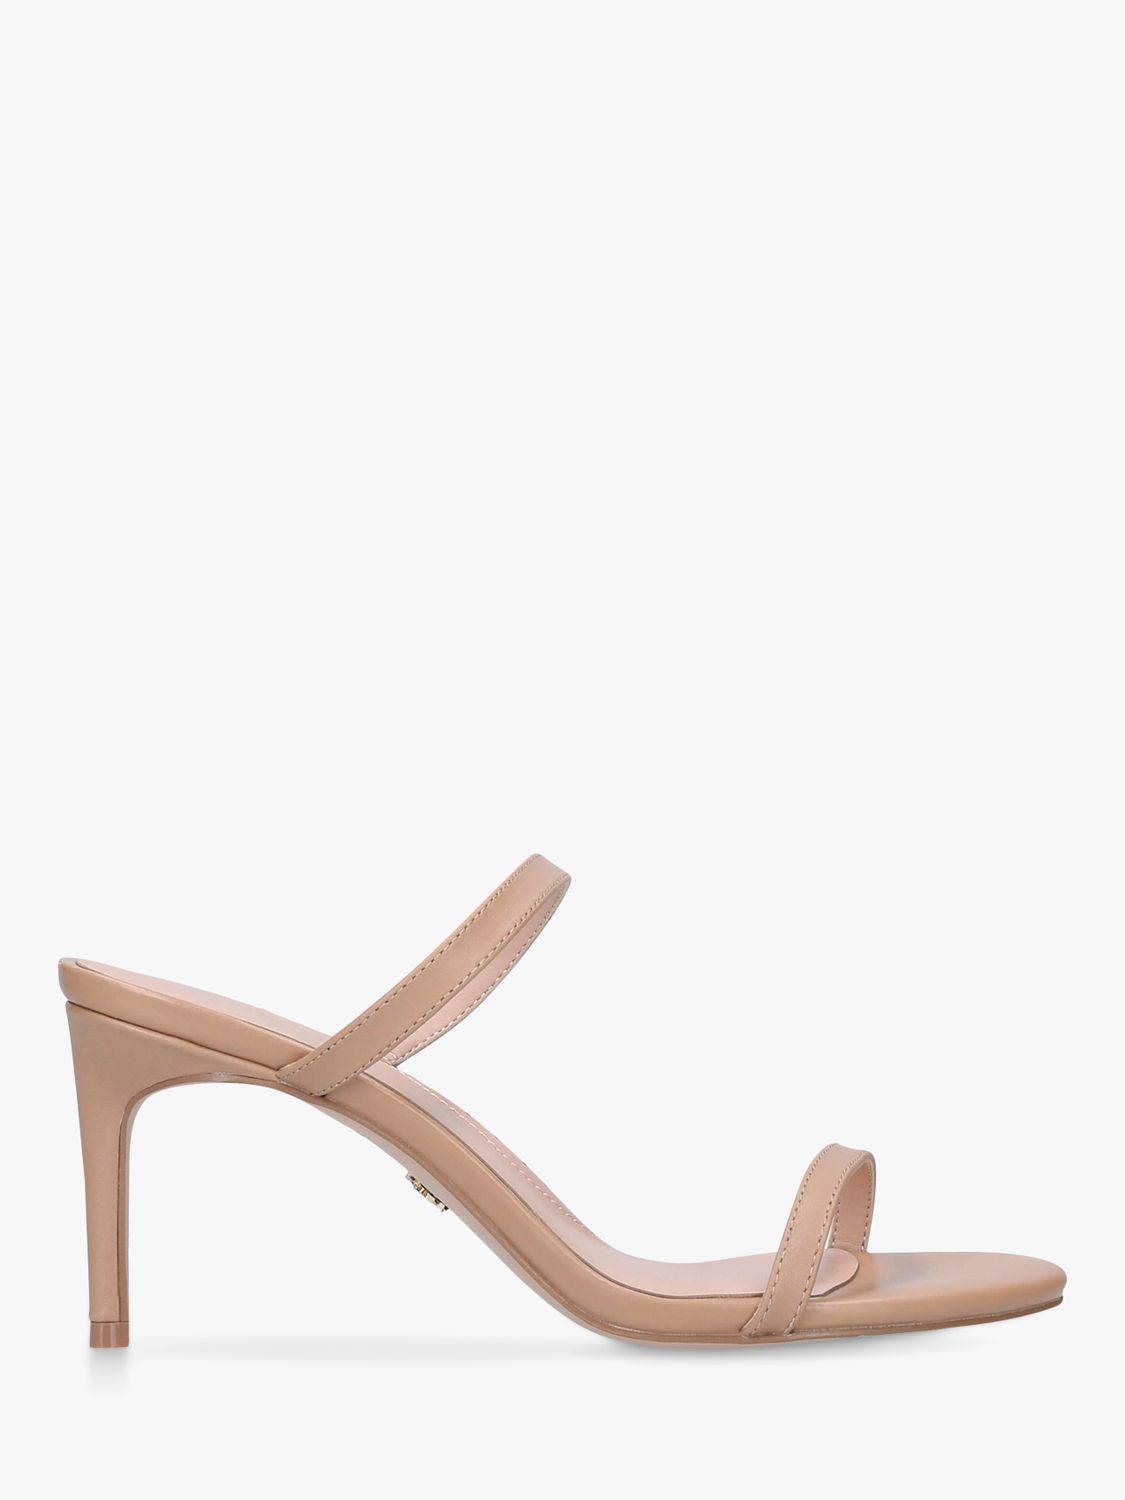 Kurt Geiger London Petra Strappy Leather Sandals, Nude